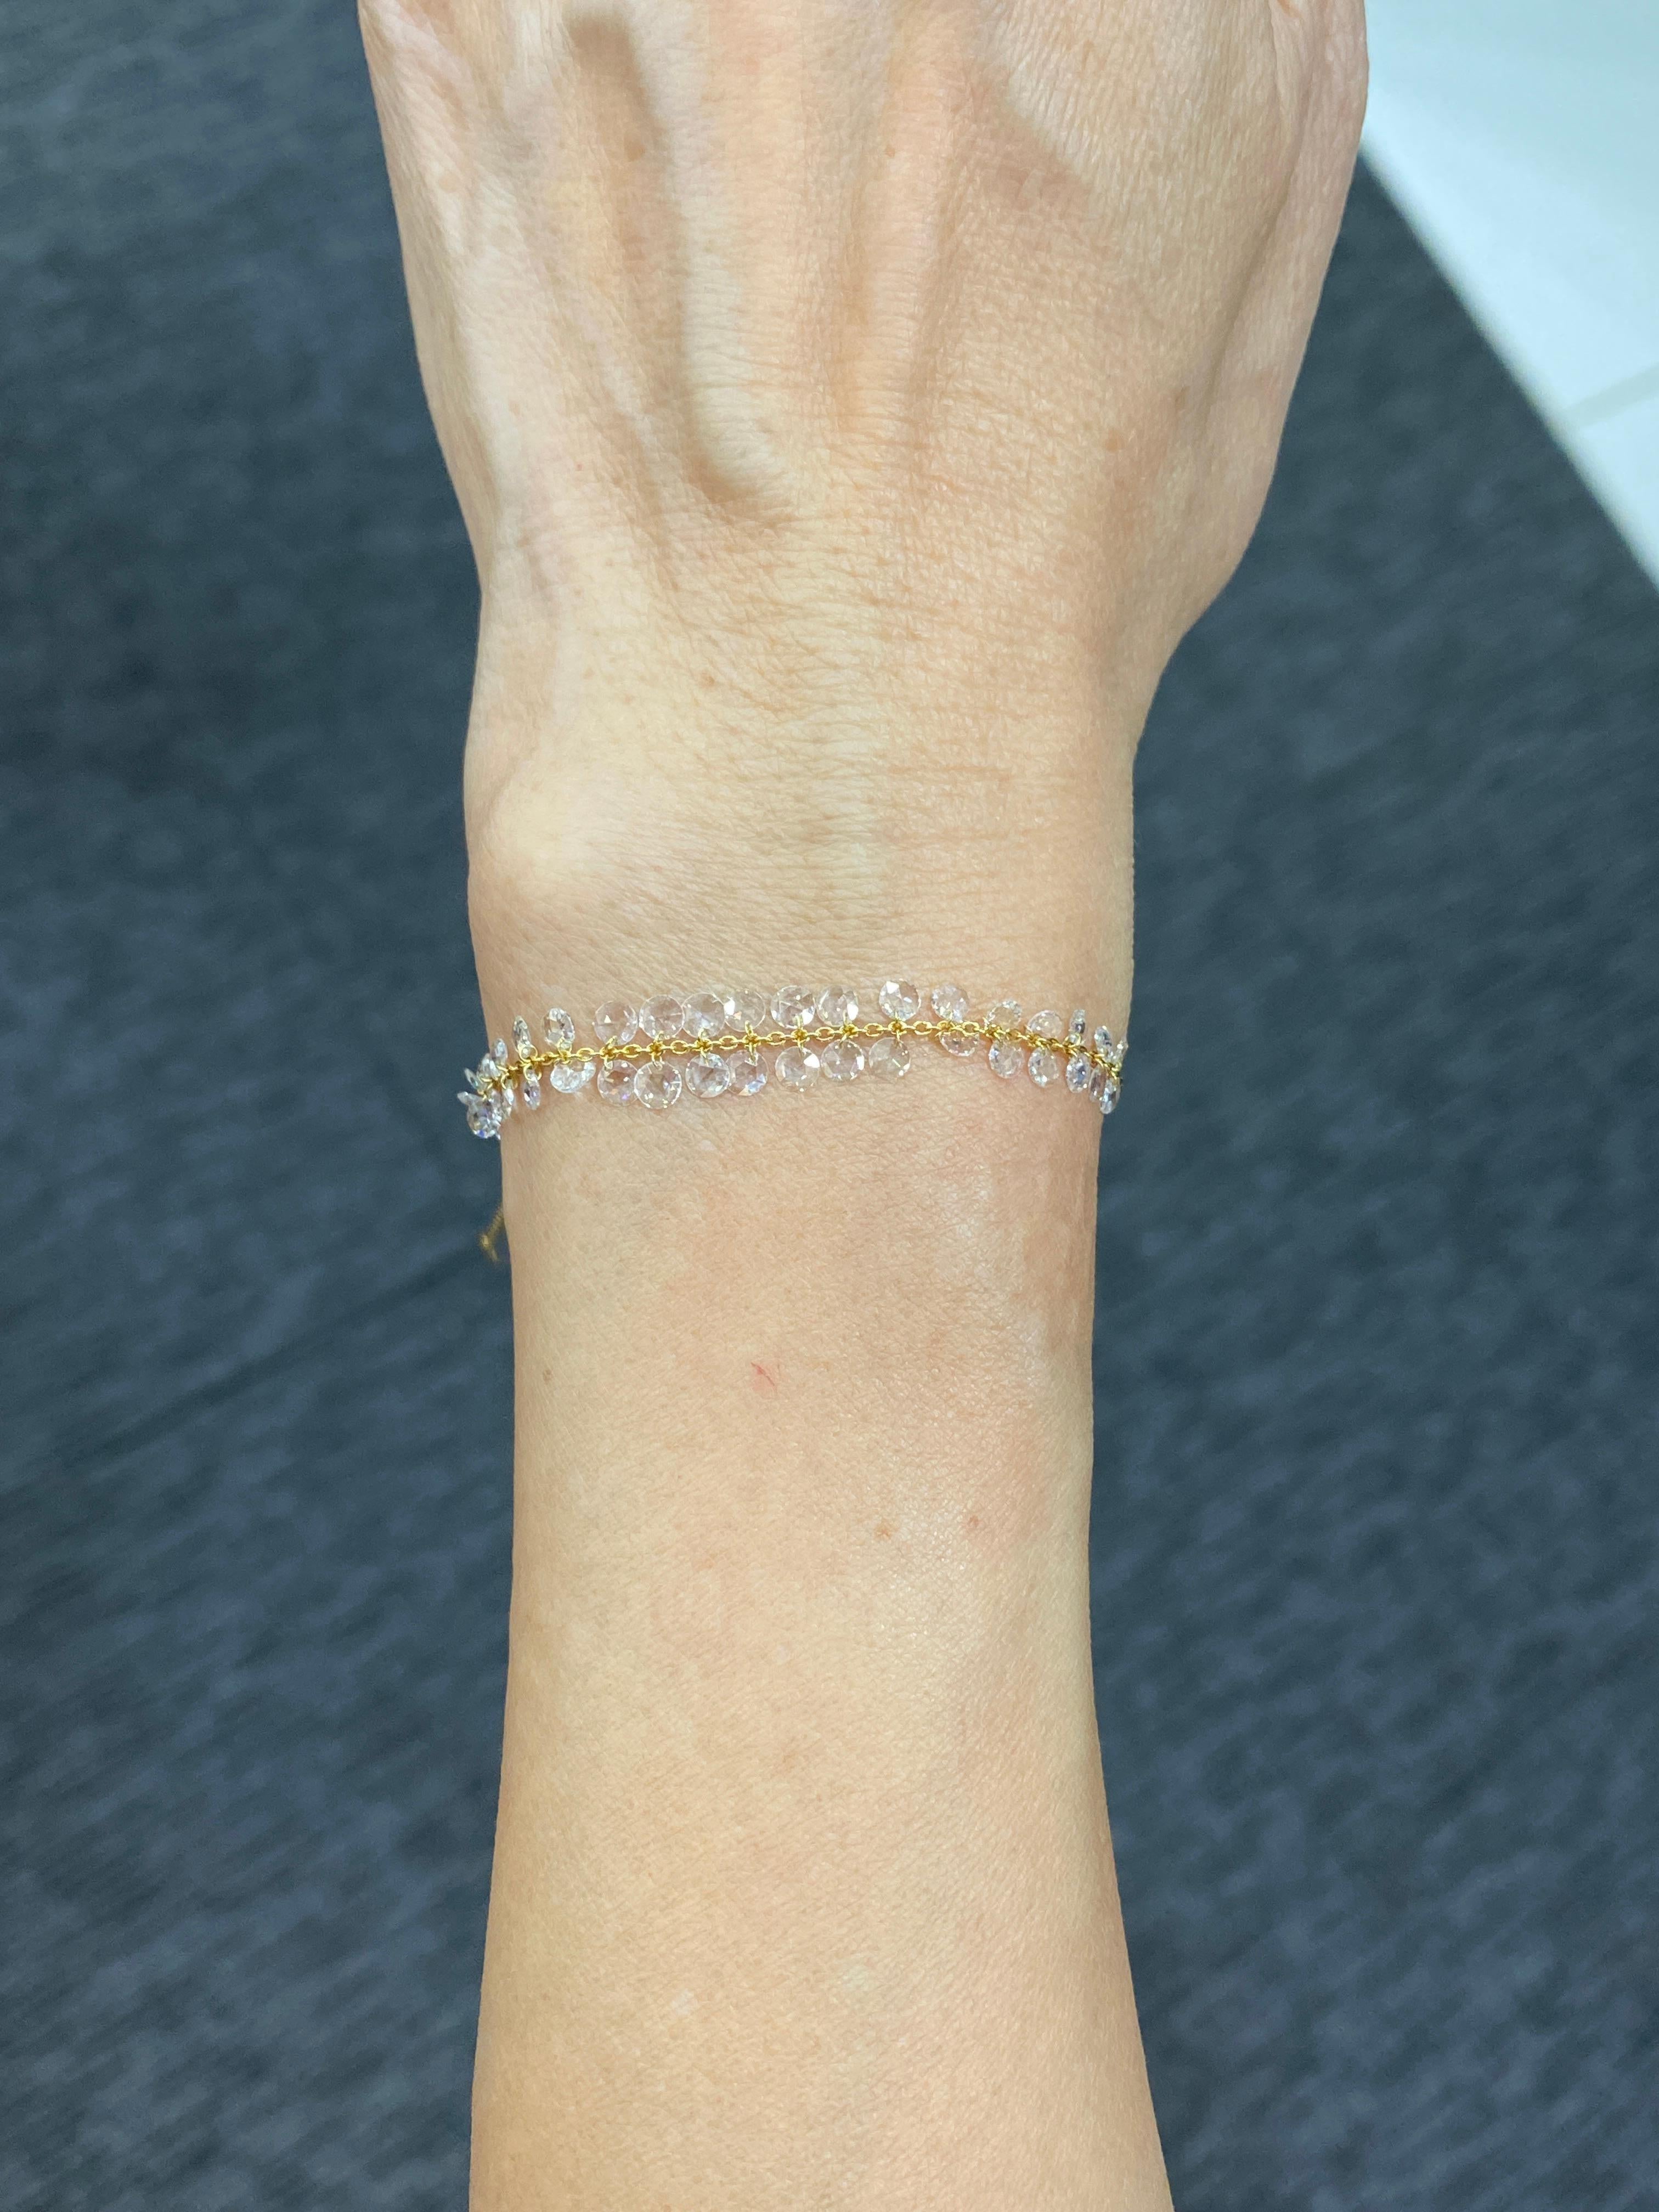 JR 2.00 Carat Dangling Rose Cut Diamond 18 Karat Yellow Gold Bracelet

Our dangling rose-cut diamond bracelet is extremely wearable. Its versatility and classic design make it a great accompaniment to various occasions. Beautifully made with Drilled